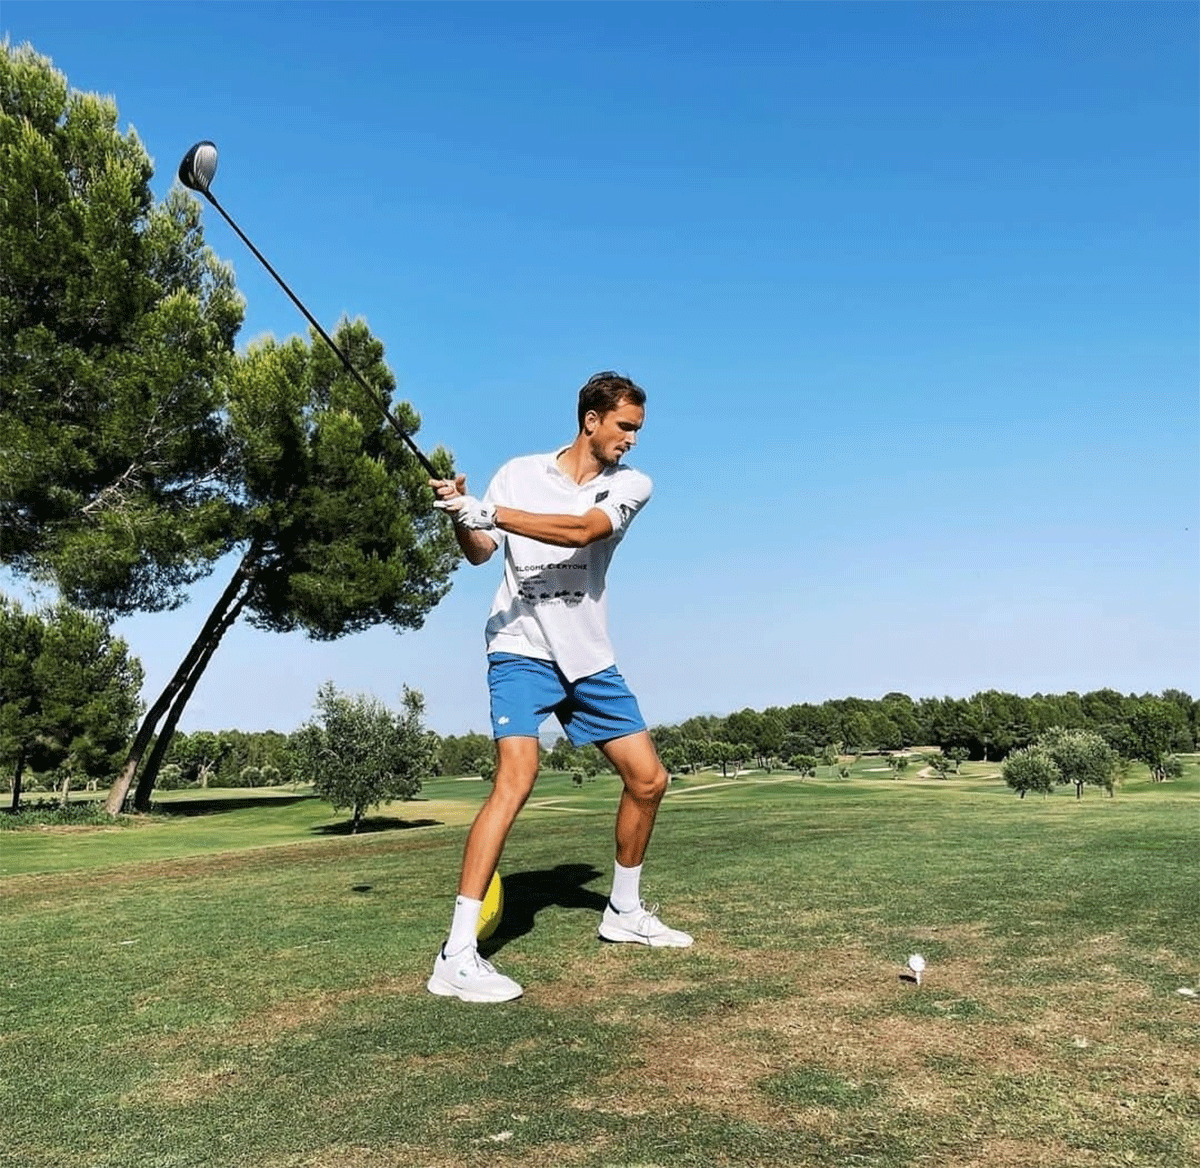 Daniil Medvedev tees off at a golf course